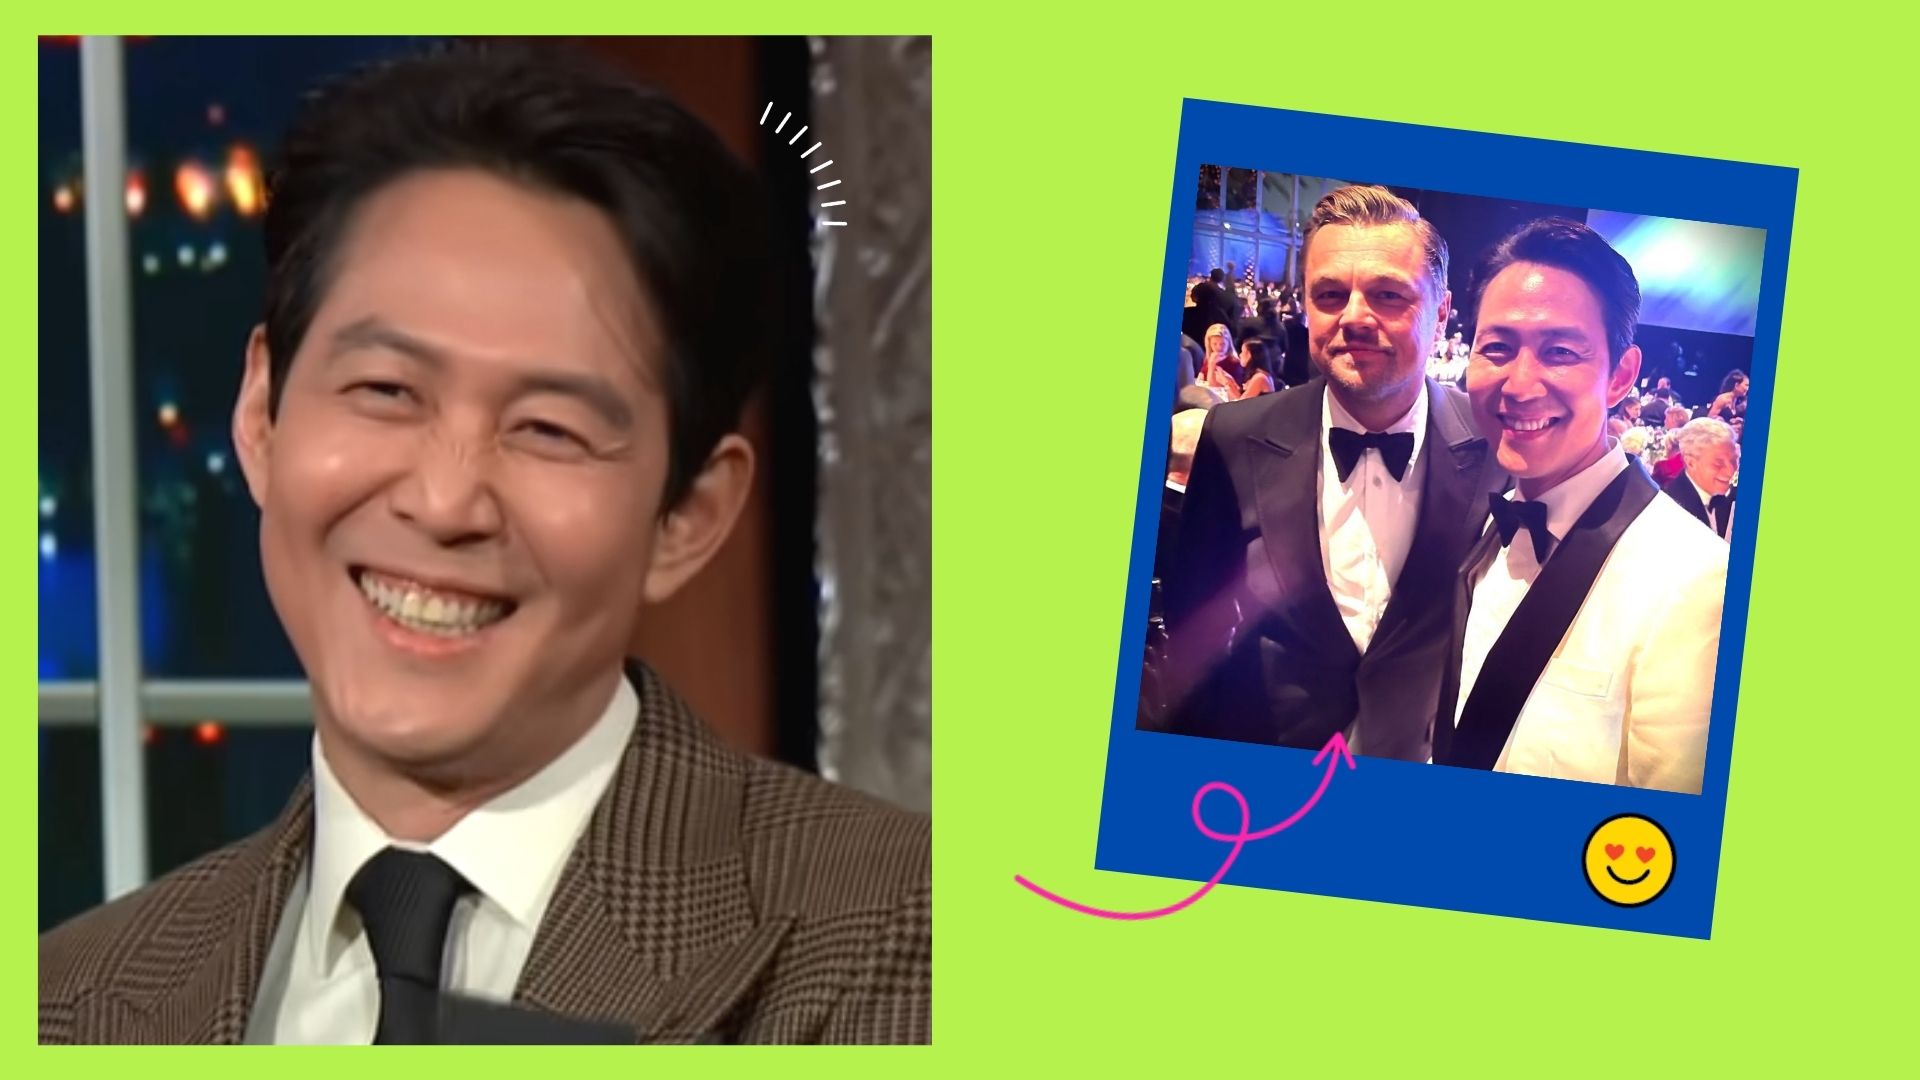 Squid Game' star Lee Jung Jae shares a happy selfie with